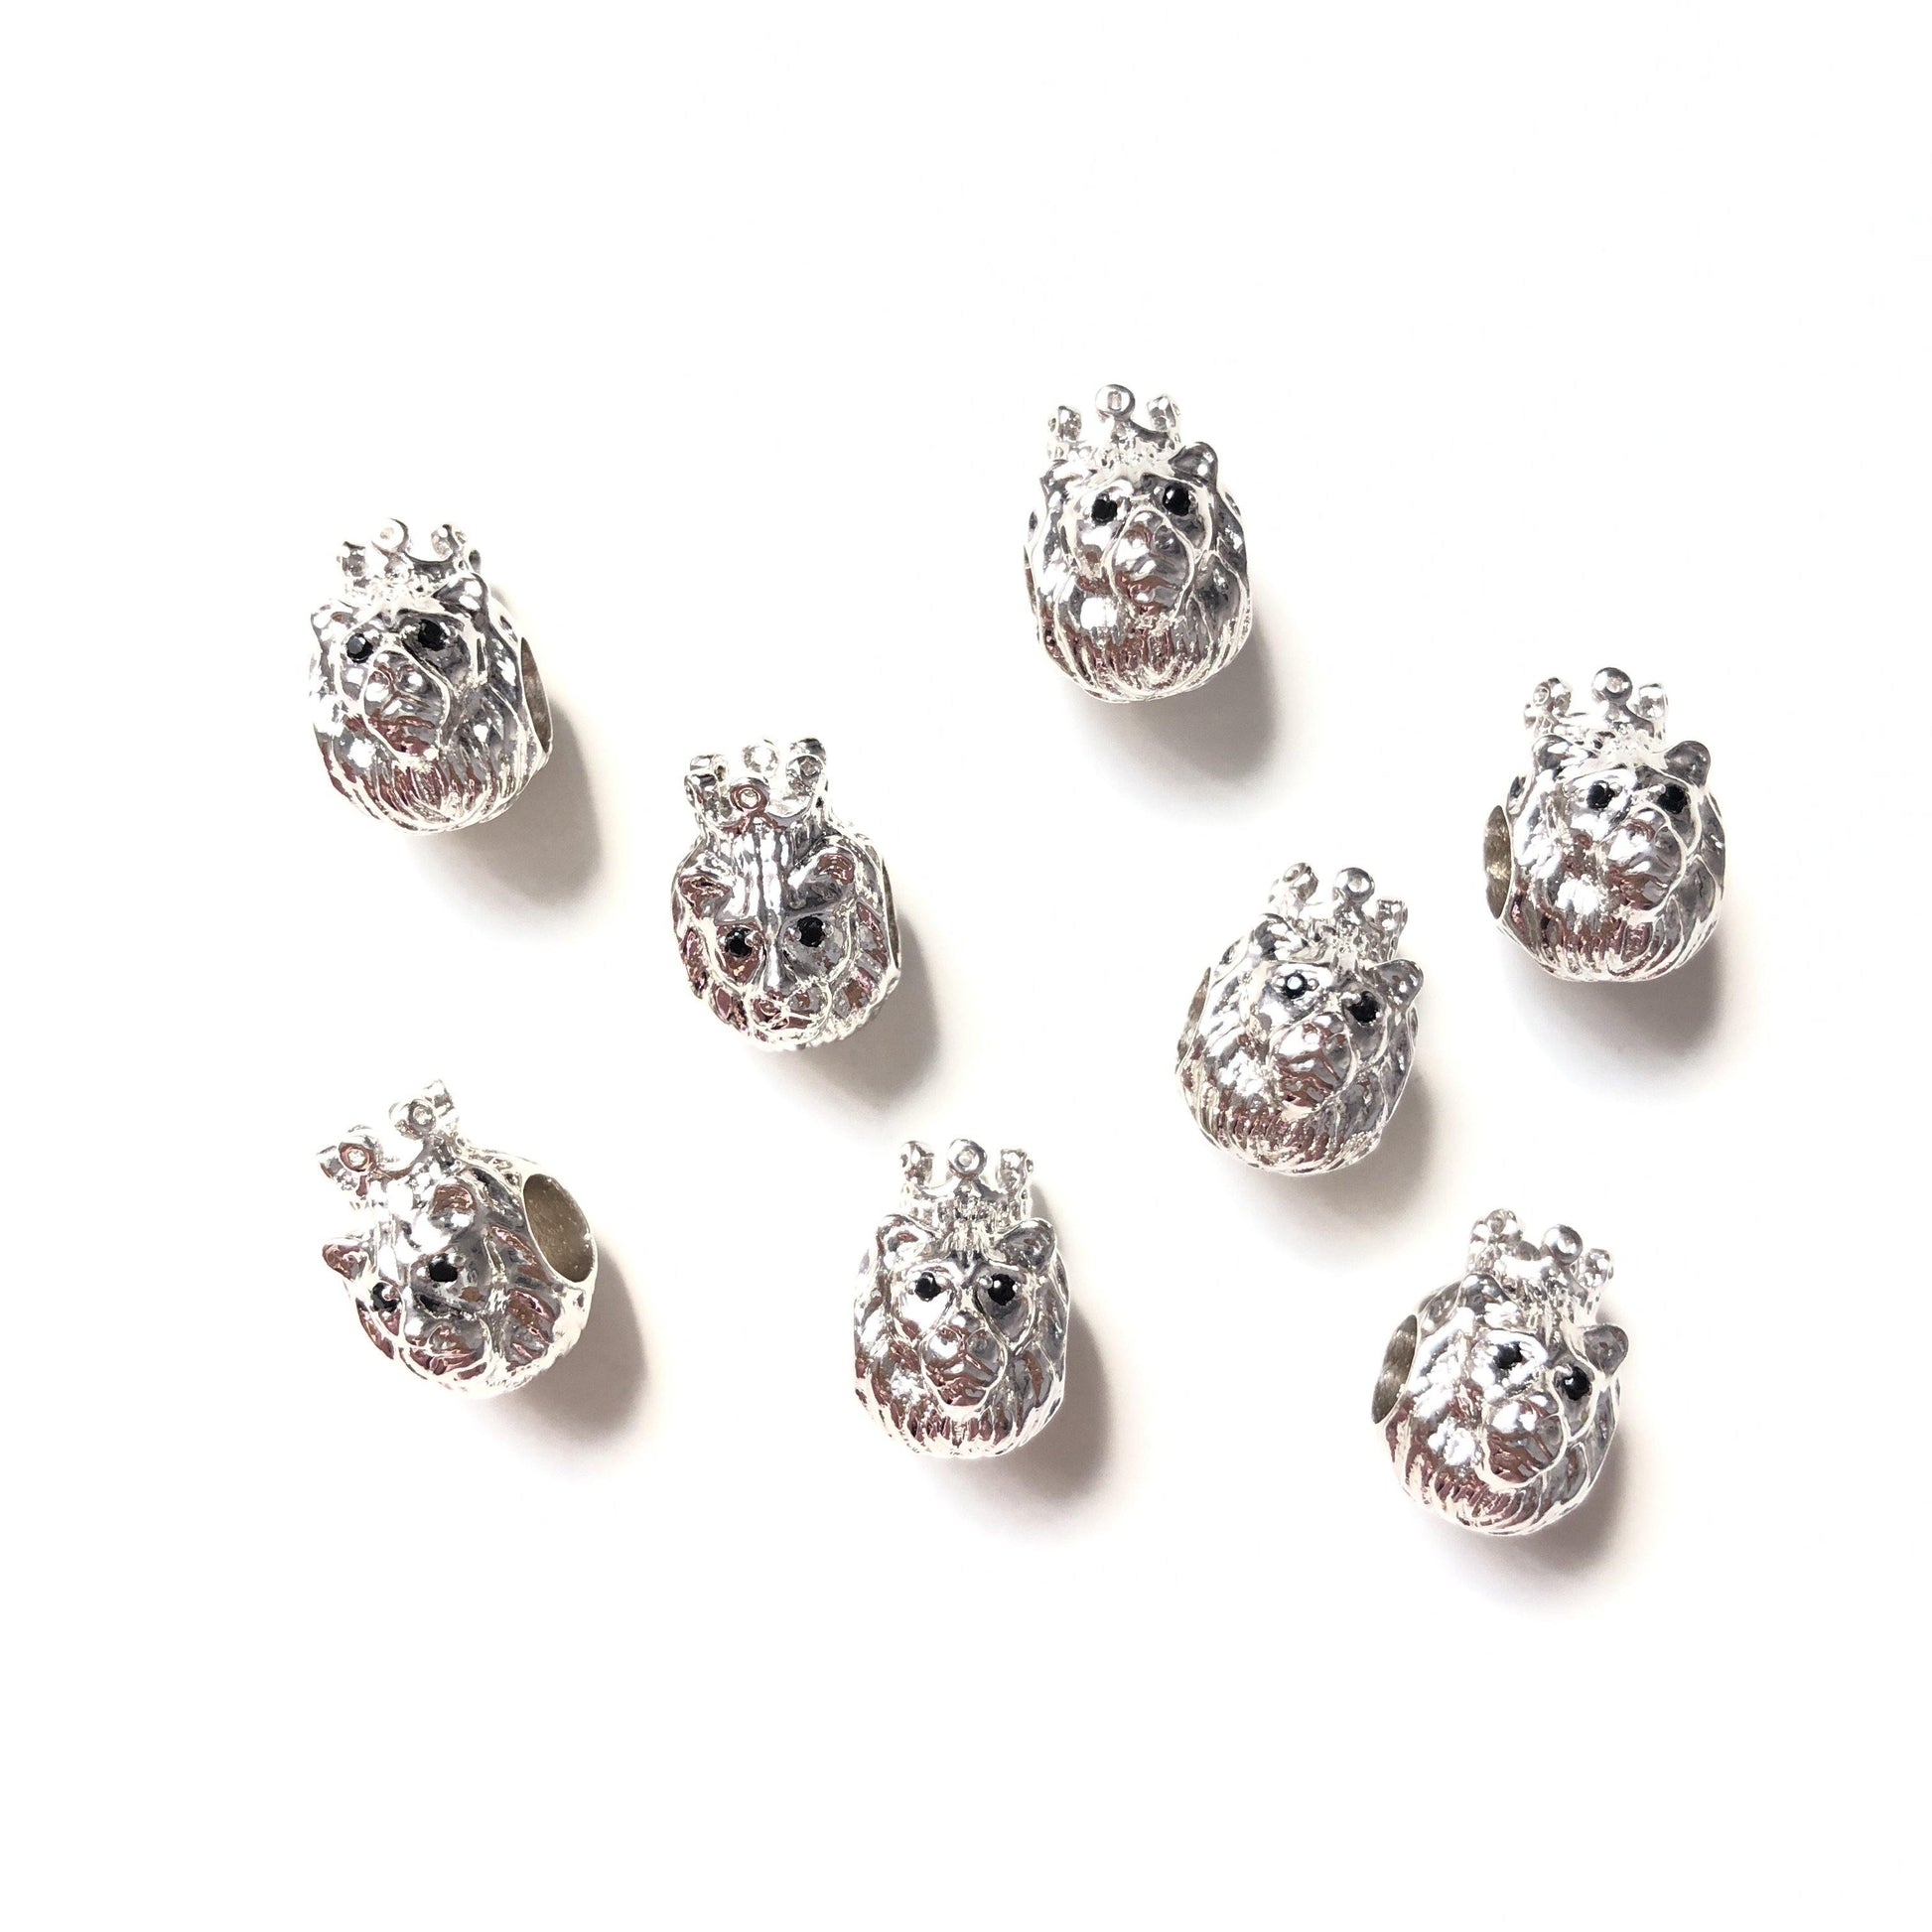 10-20pcs Gold Plated Copper Crown Lion King Spacers Silver CZ Paved Spacers Animal Spacers Charms Beads Beyond